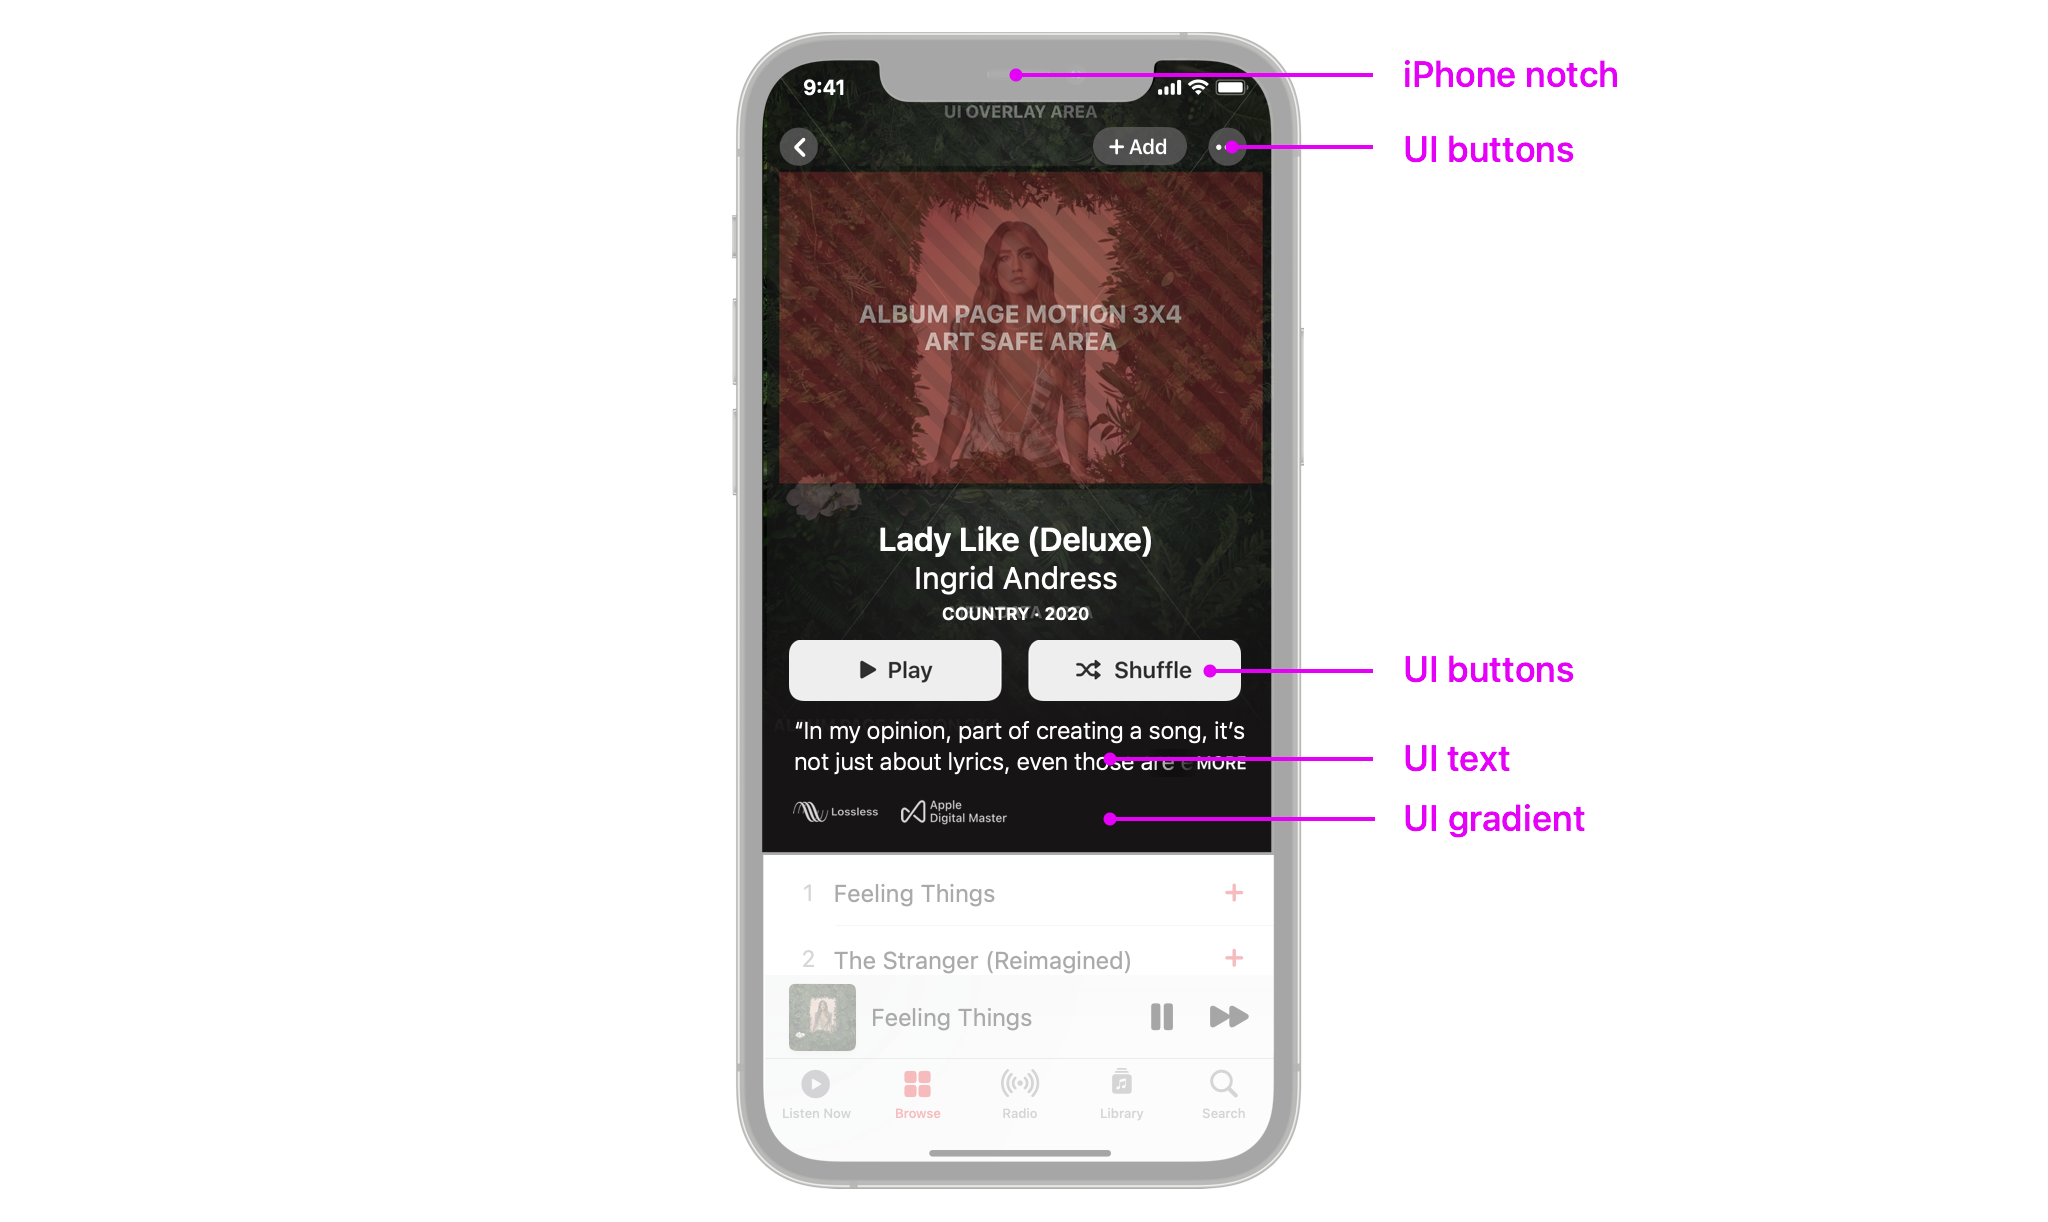 An iPhone highlighting UI areas, such as buttons and the iPhone notch to be aware of when creating album motion art.